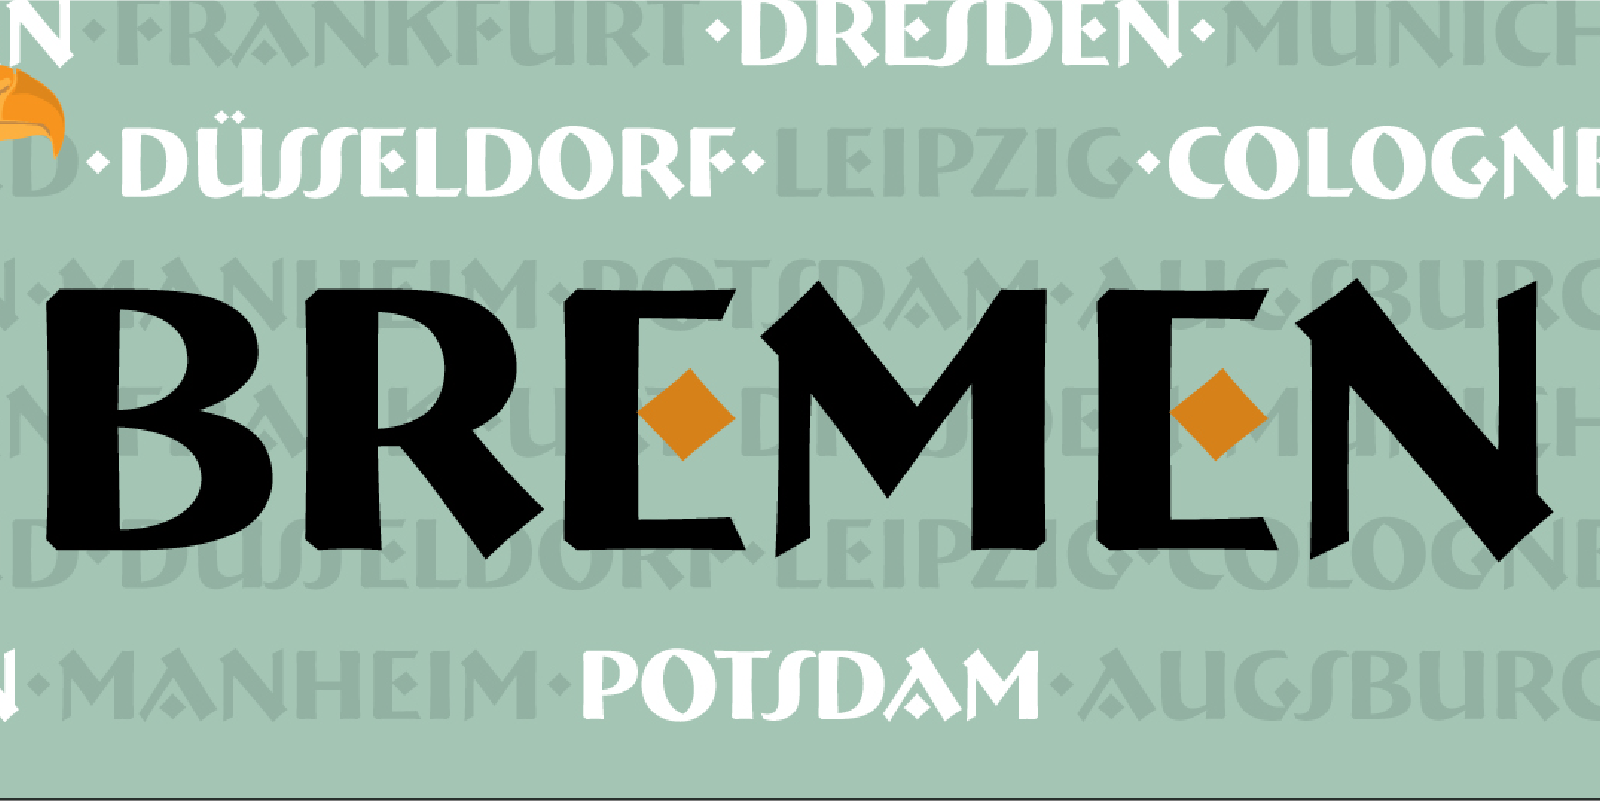 Card displaying Bremen typeface in various styles